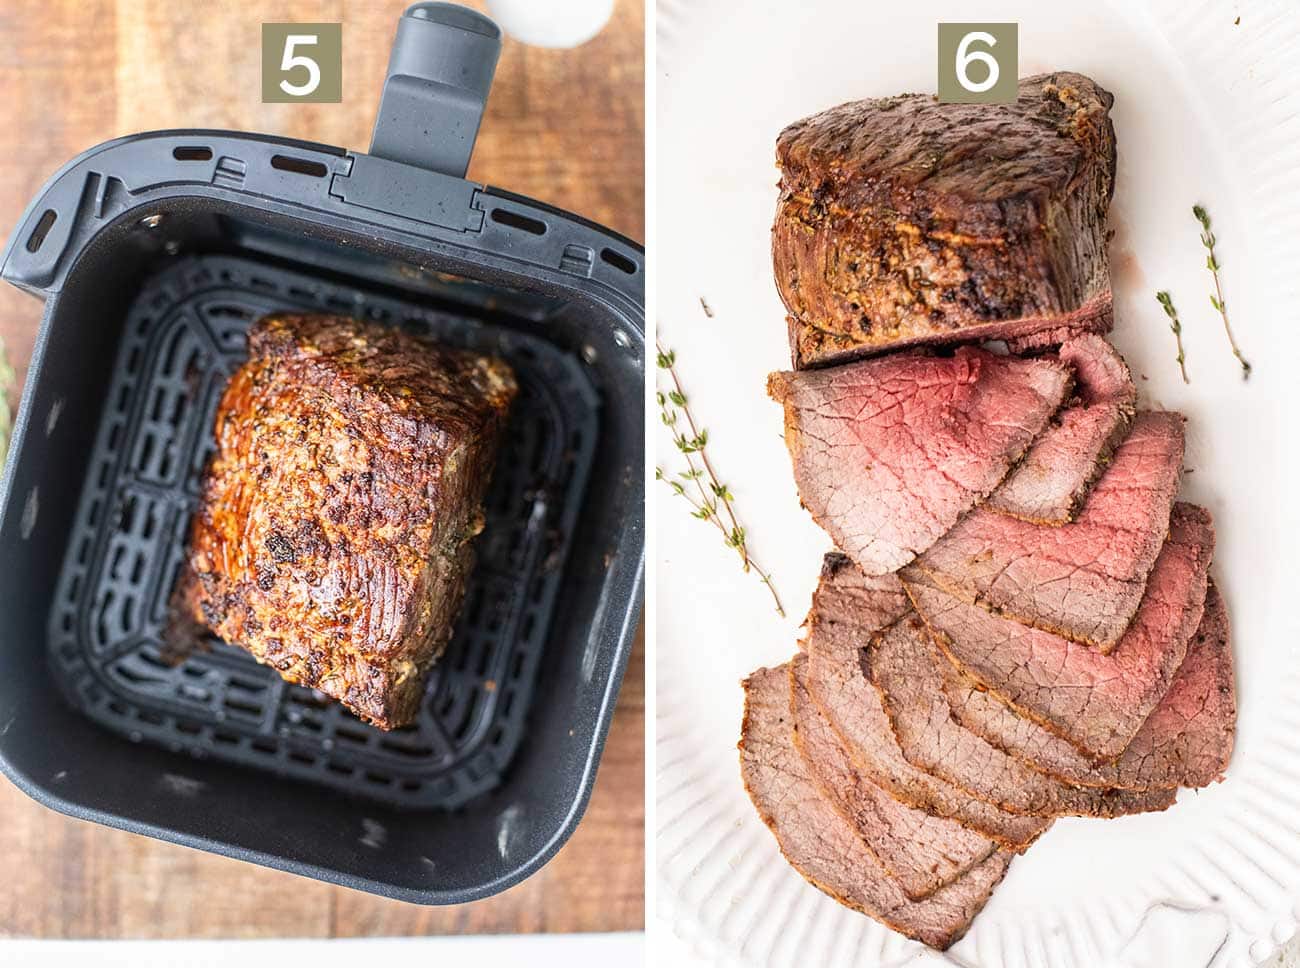 Step 5 shows a cooked beef roast in an air fryer, and step 6 shows the roast being sliced thinly.